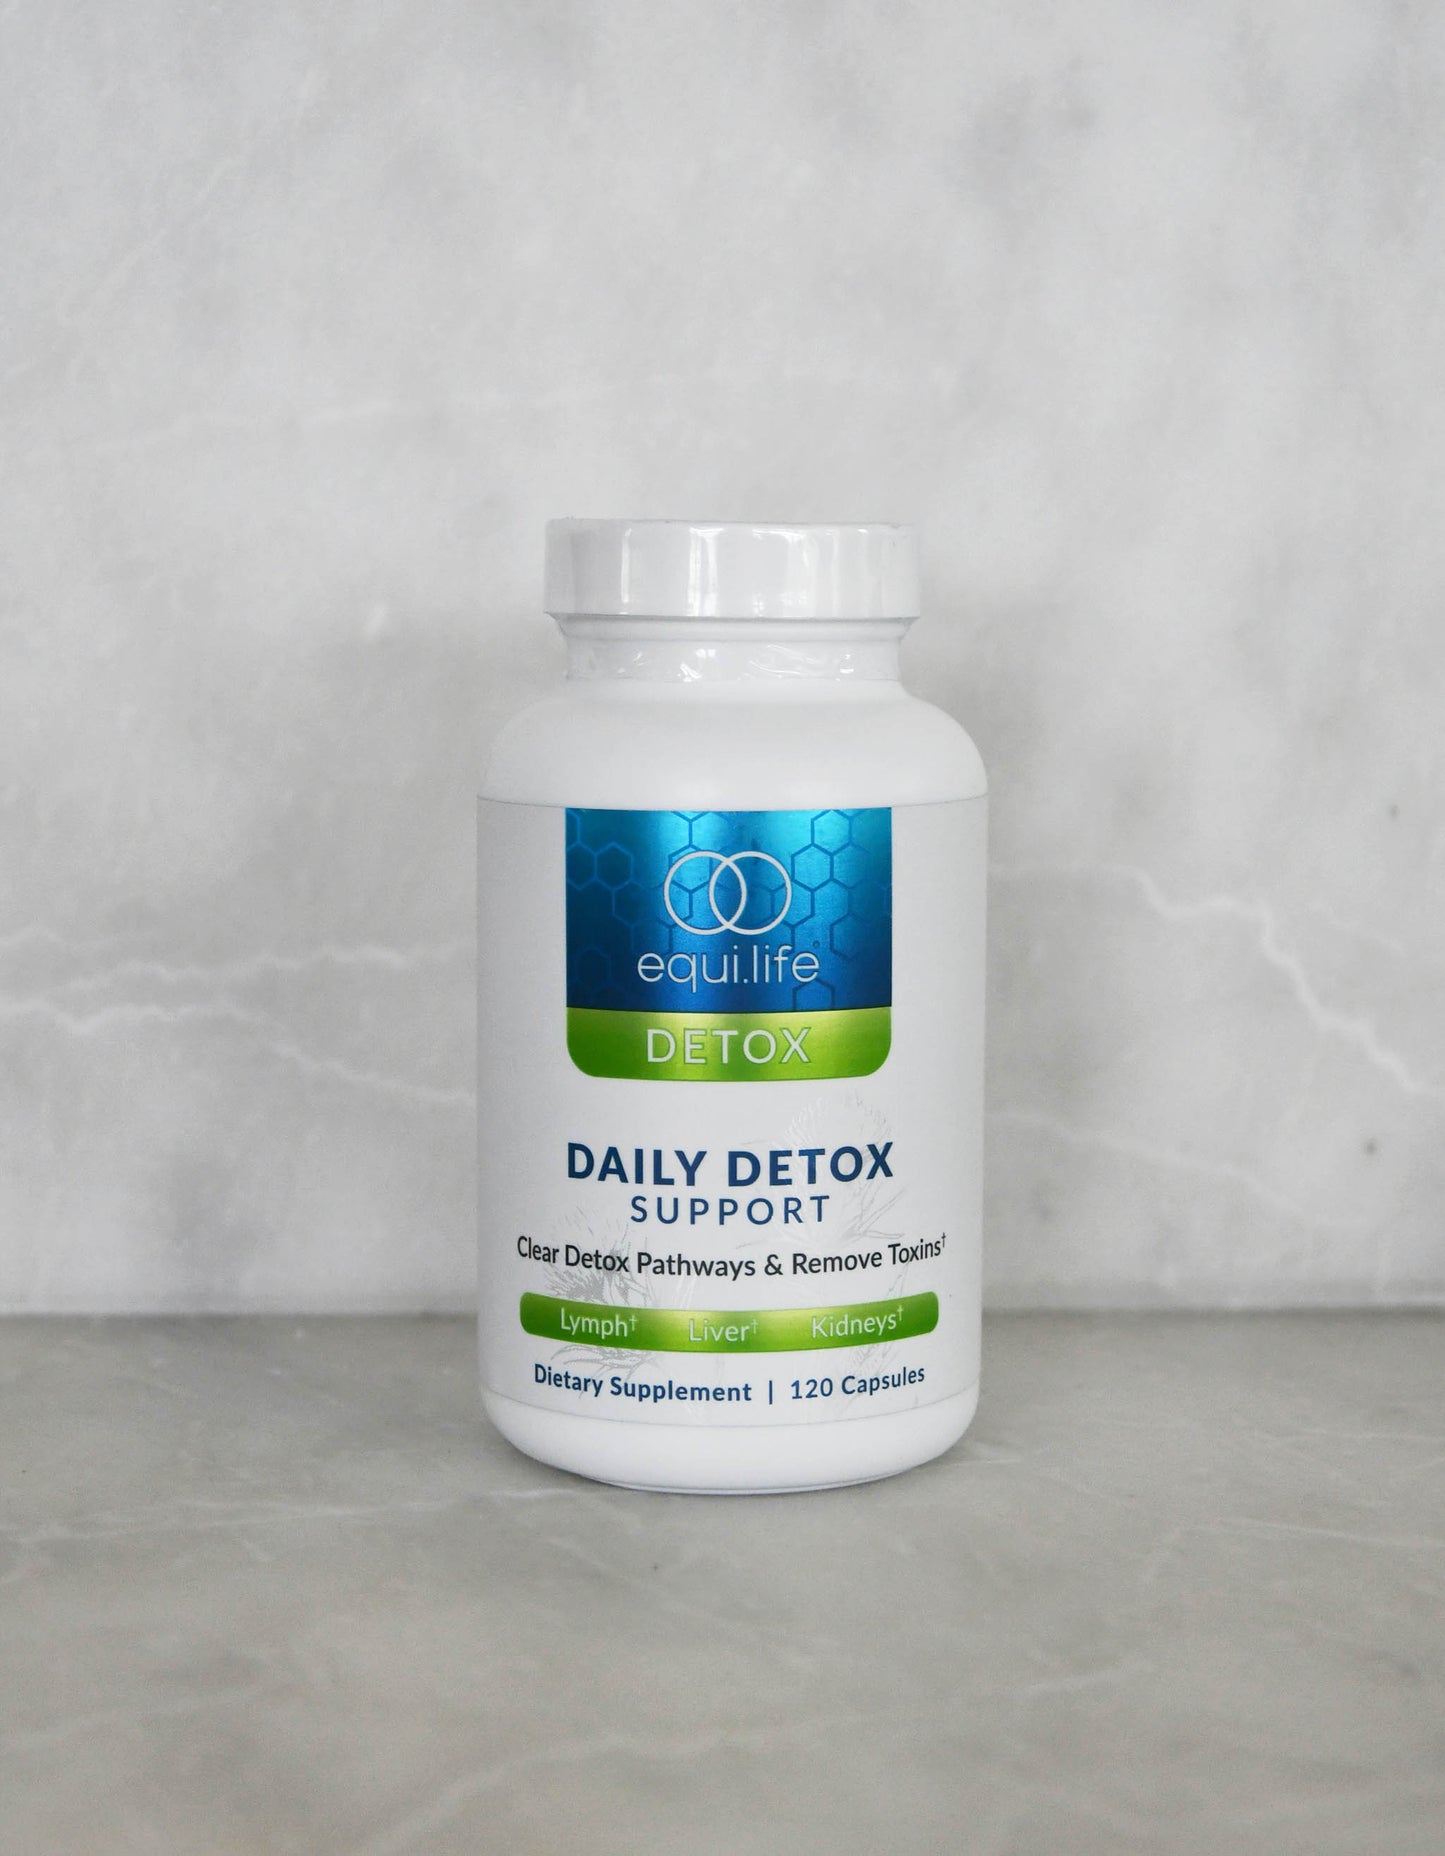 Daily Detox Support